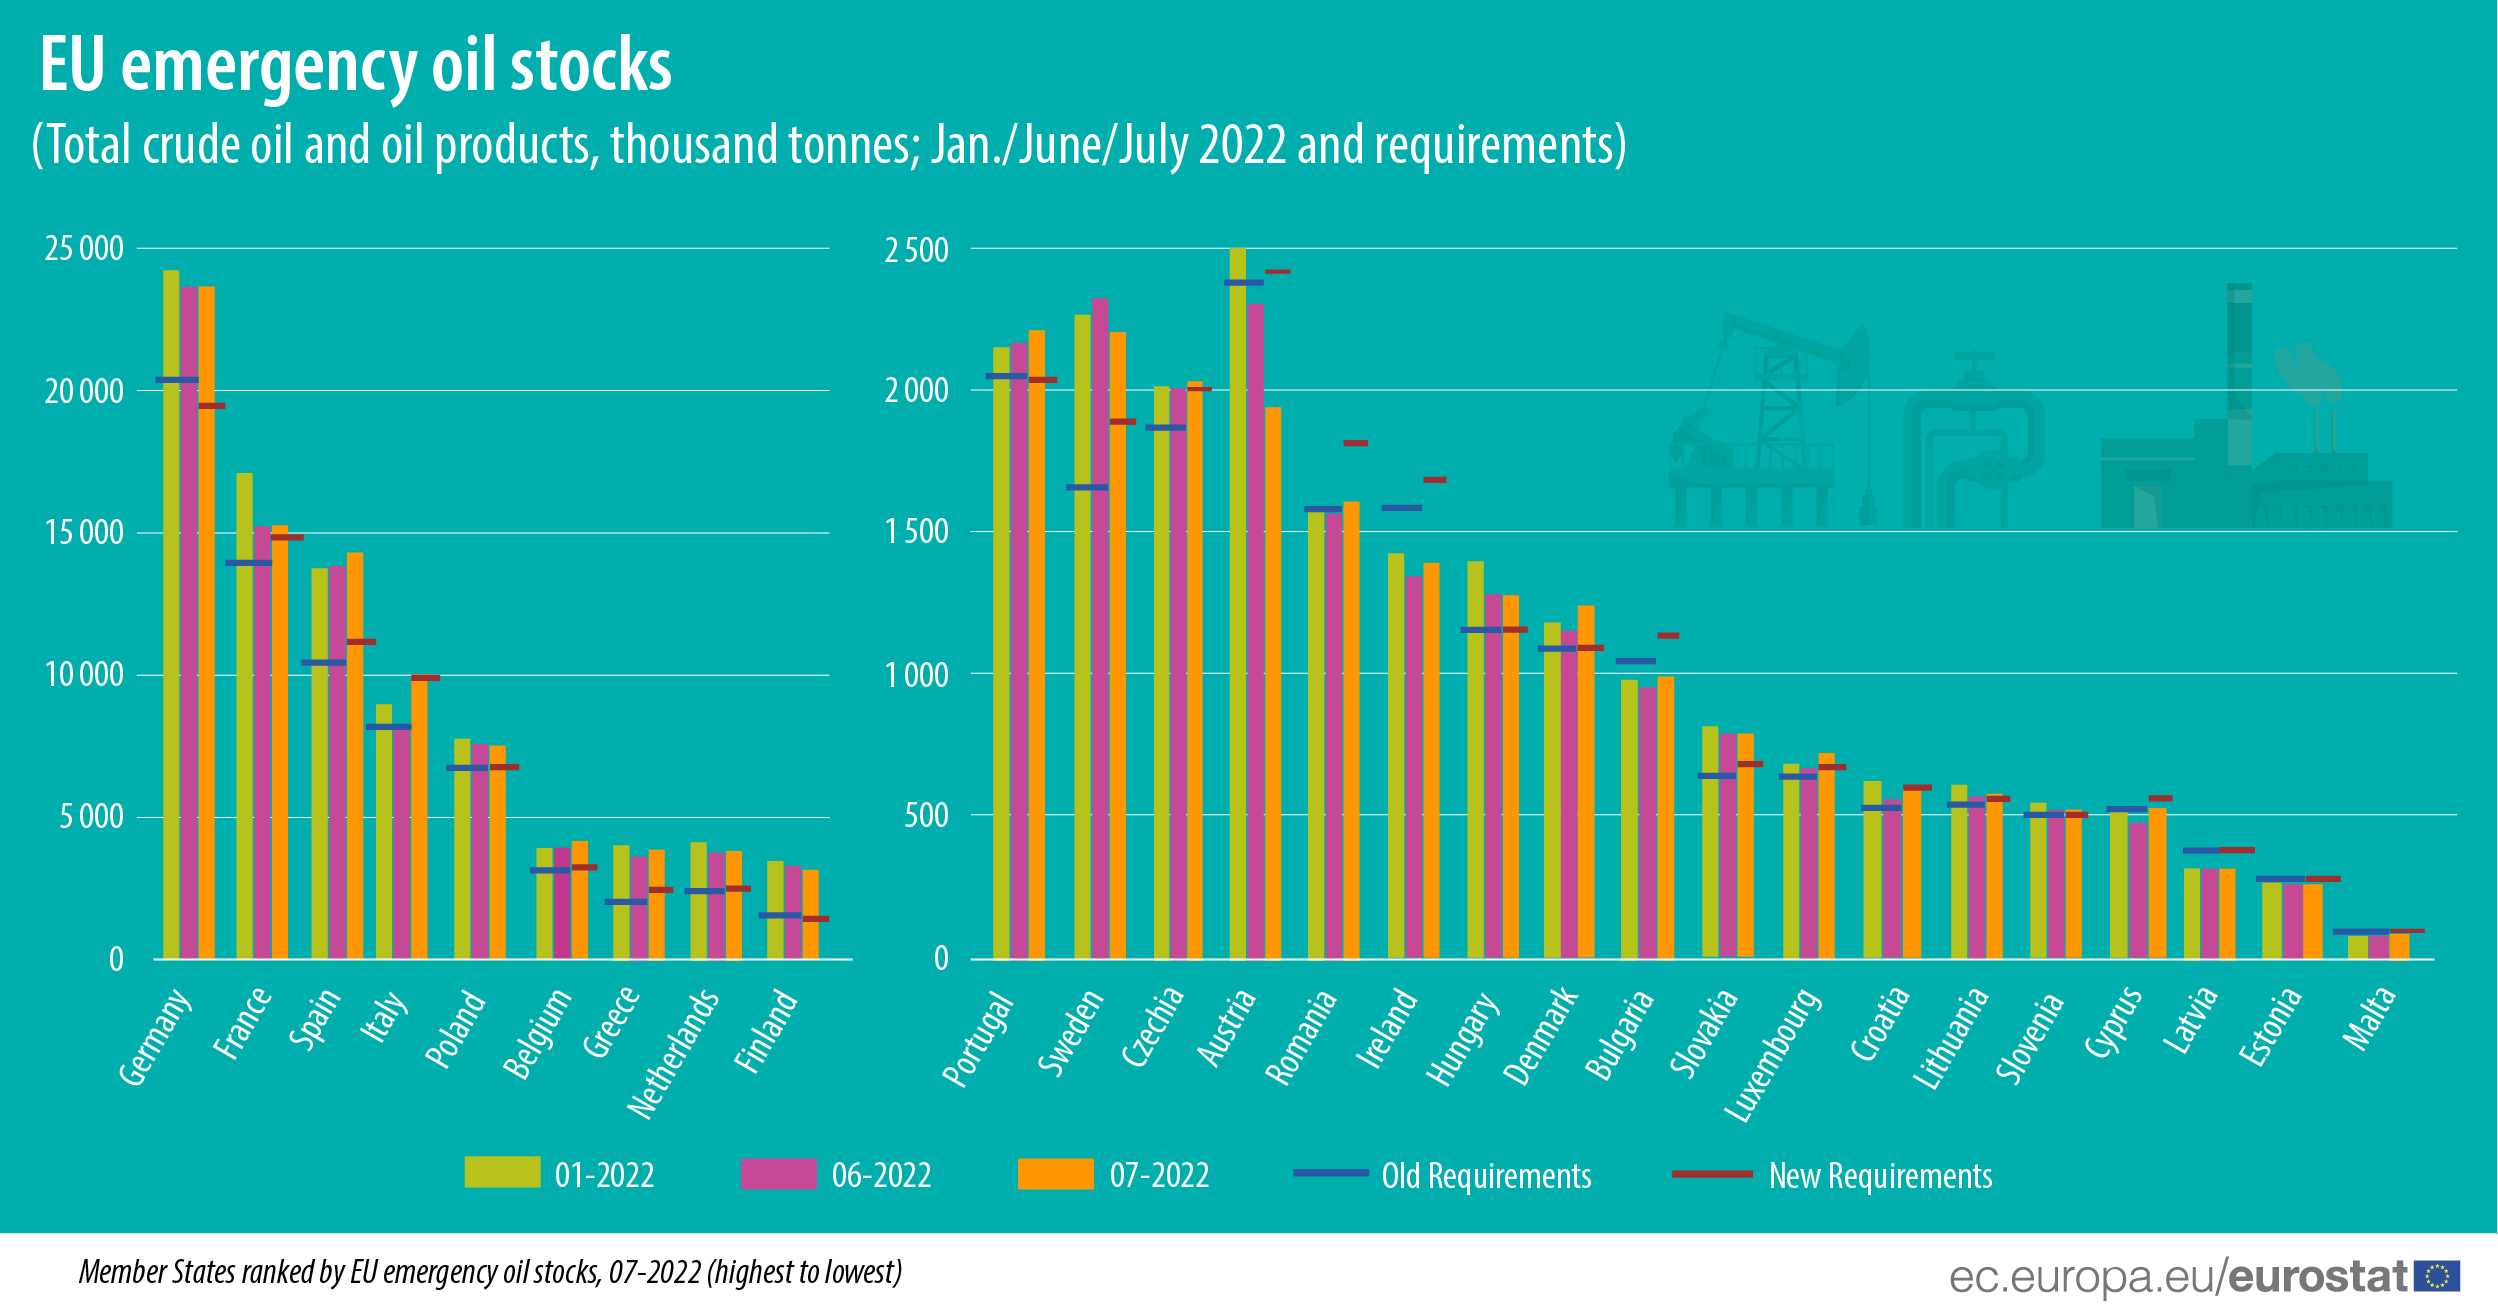 Bar chart: Emergency oil stock of the EU, total crude oil and oil products, thousand tonnes, and requirements, Jan./June/July 2022